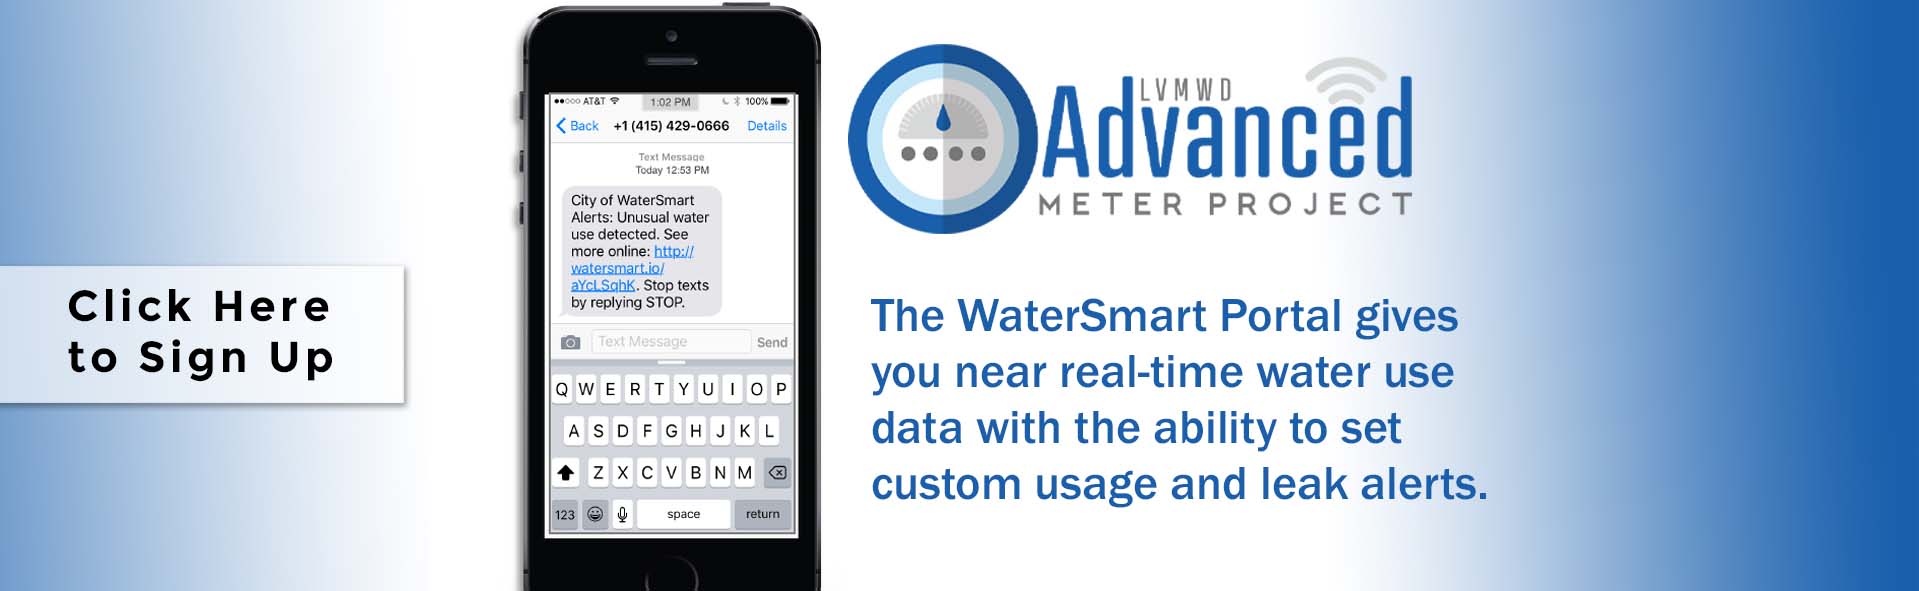 Advanced Meter Ptoject - Customer Connect - Sign up for Advanced Meter Account